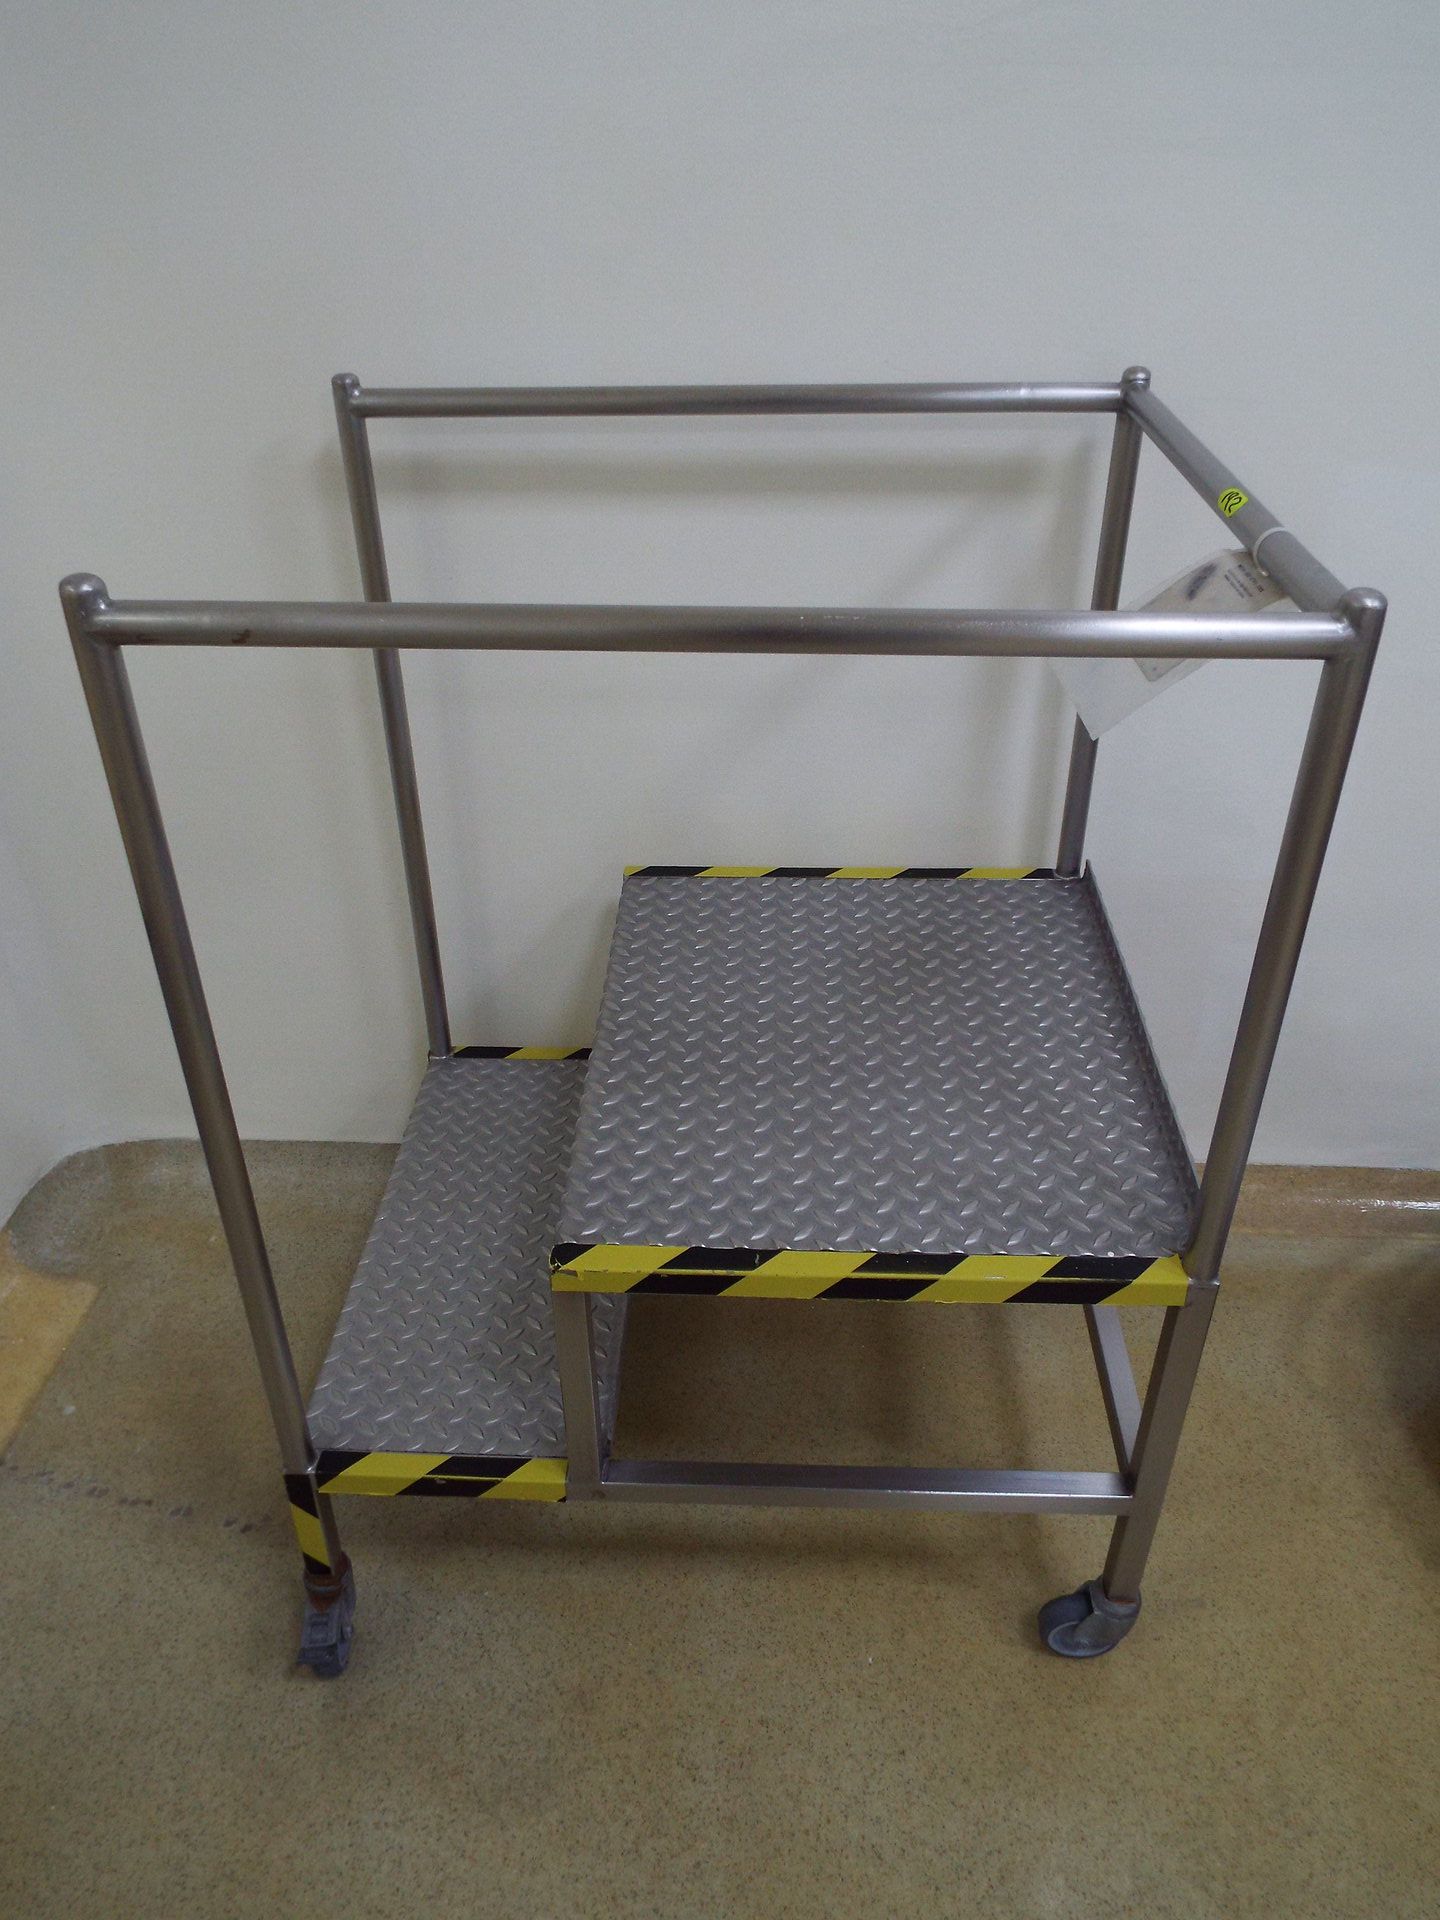 Stainless steel 2 step ladder with handrail on casters